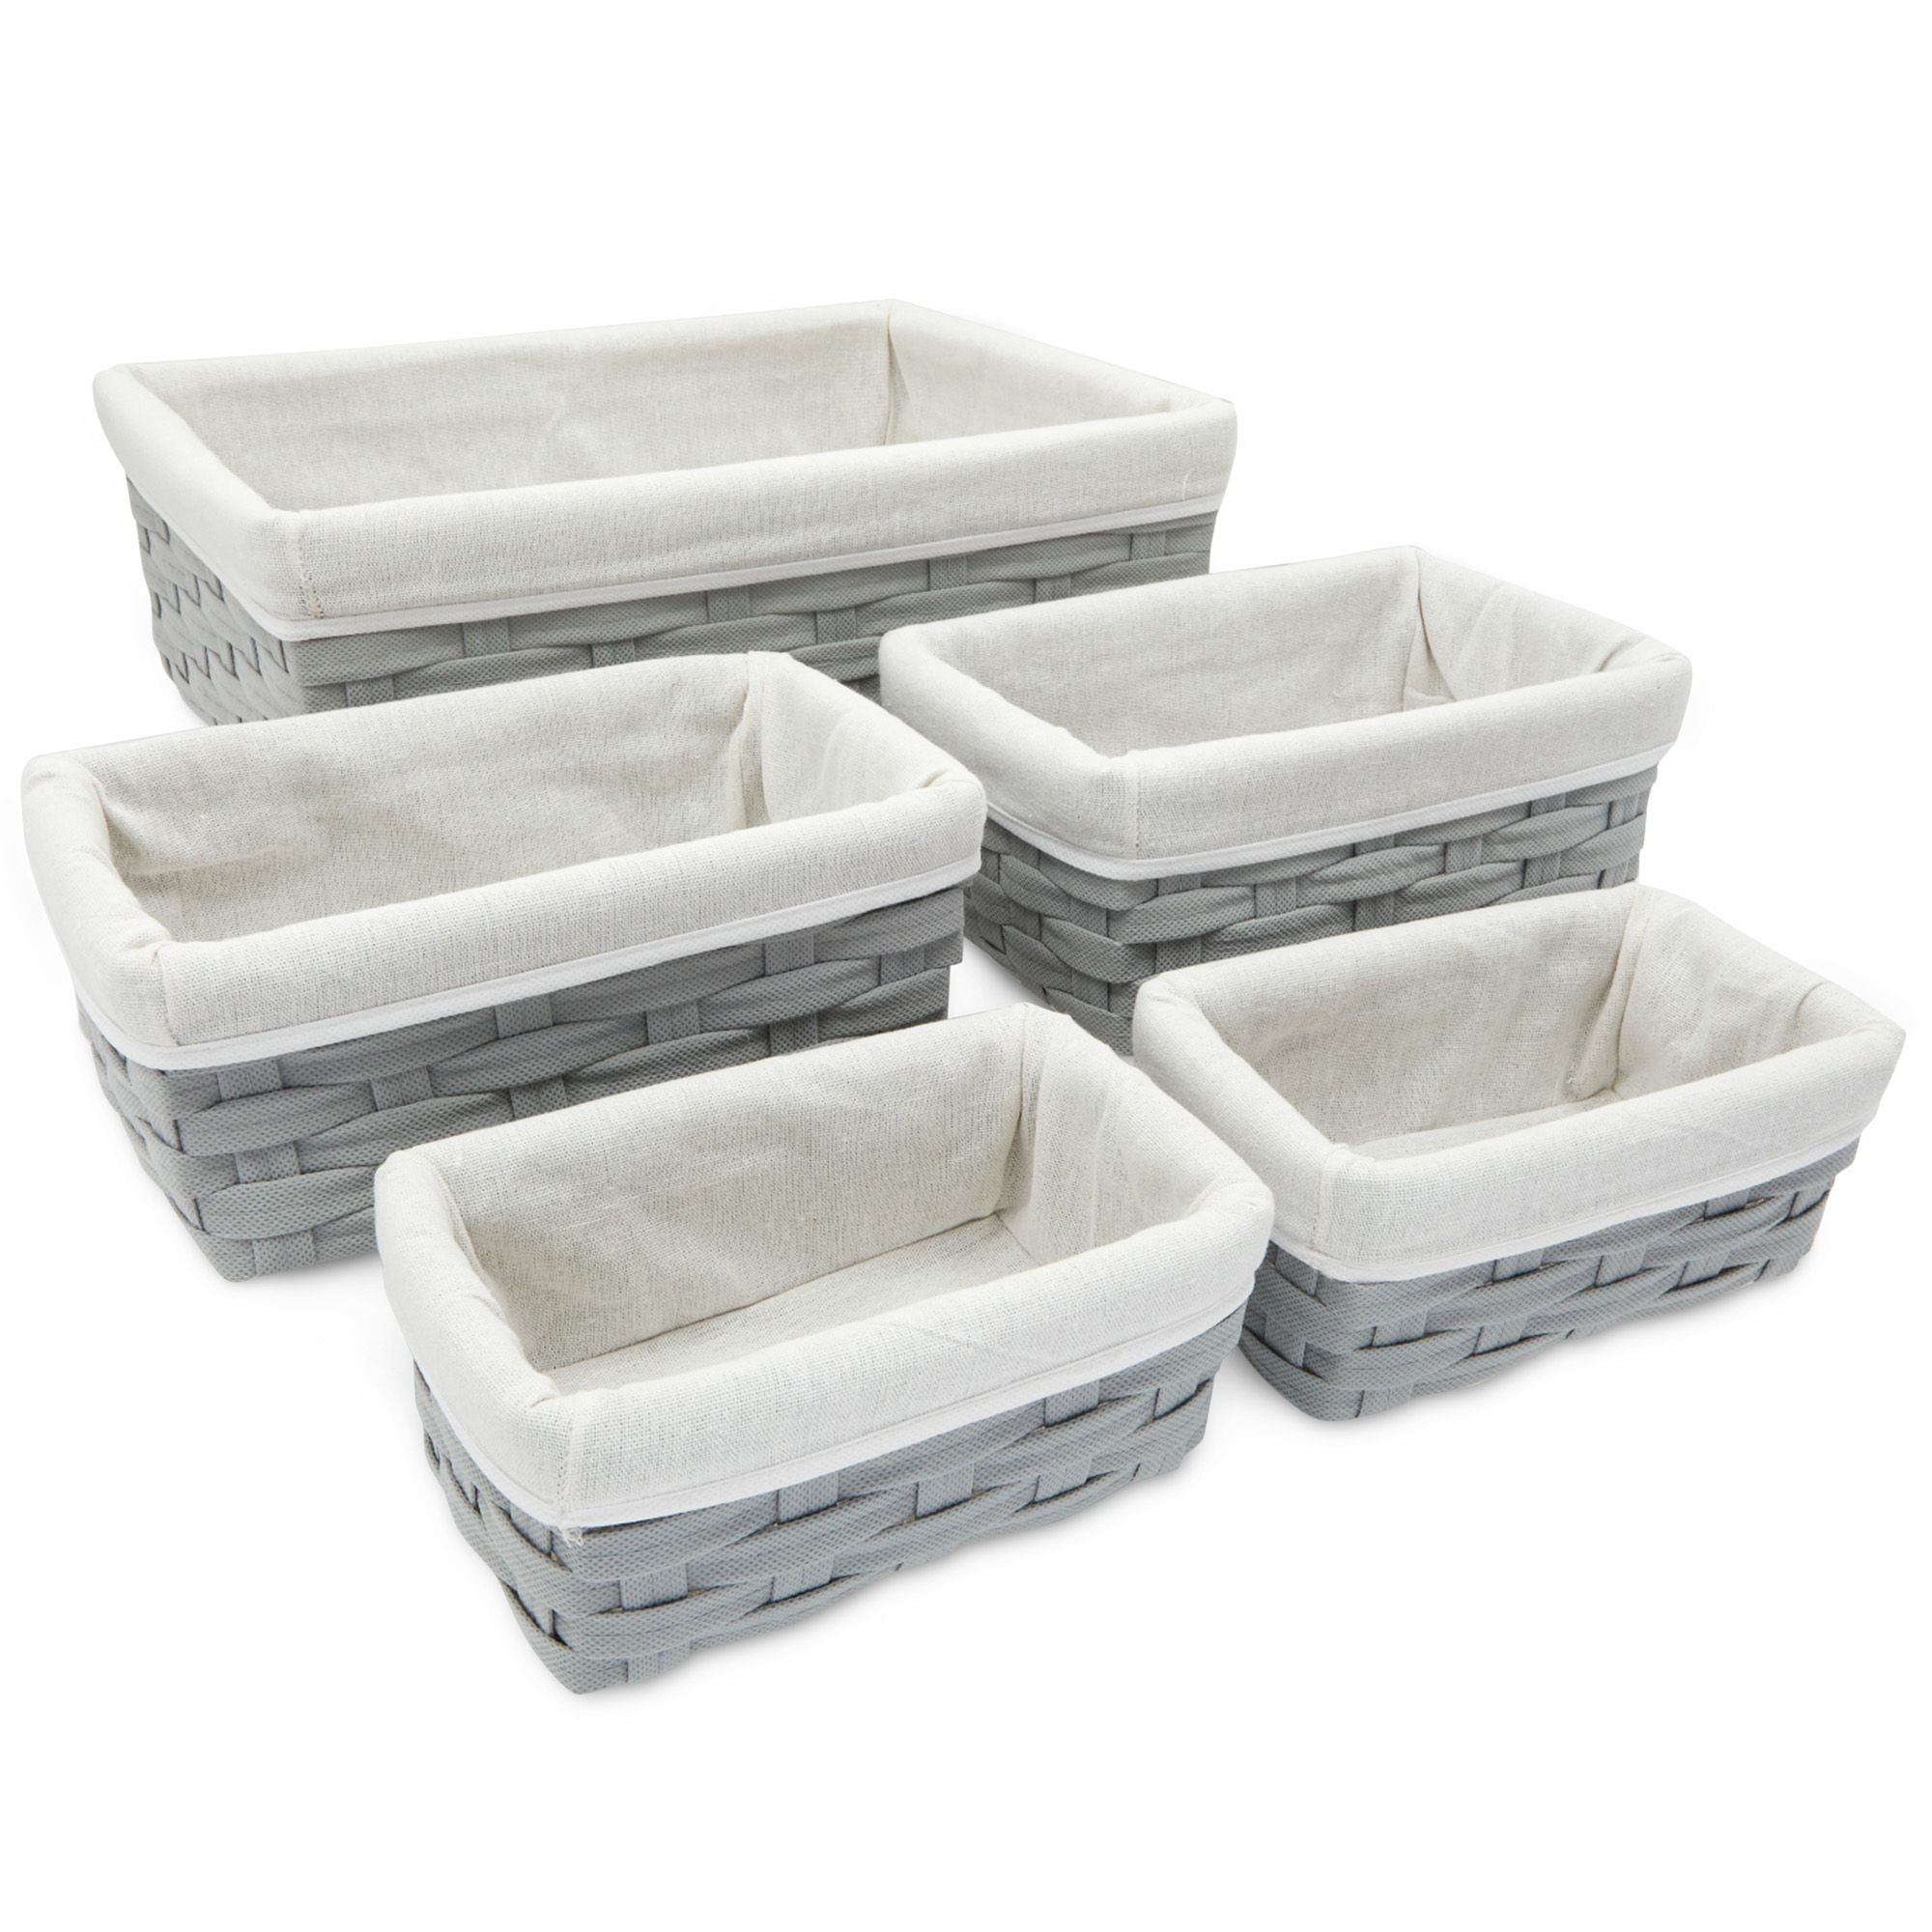 Toilet Paper Storage Basket for Bathroom Organizing, Rectangular Bin for  Fabric Storage, Counter (Gray, 16 x 6 x 5.5 In)